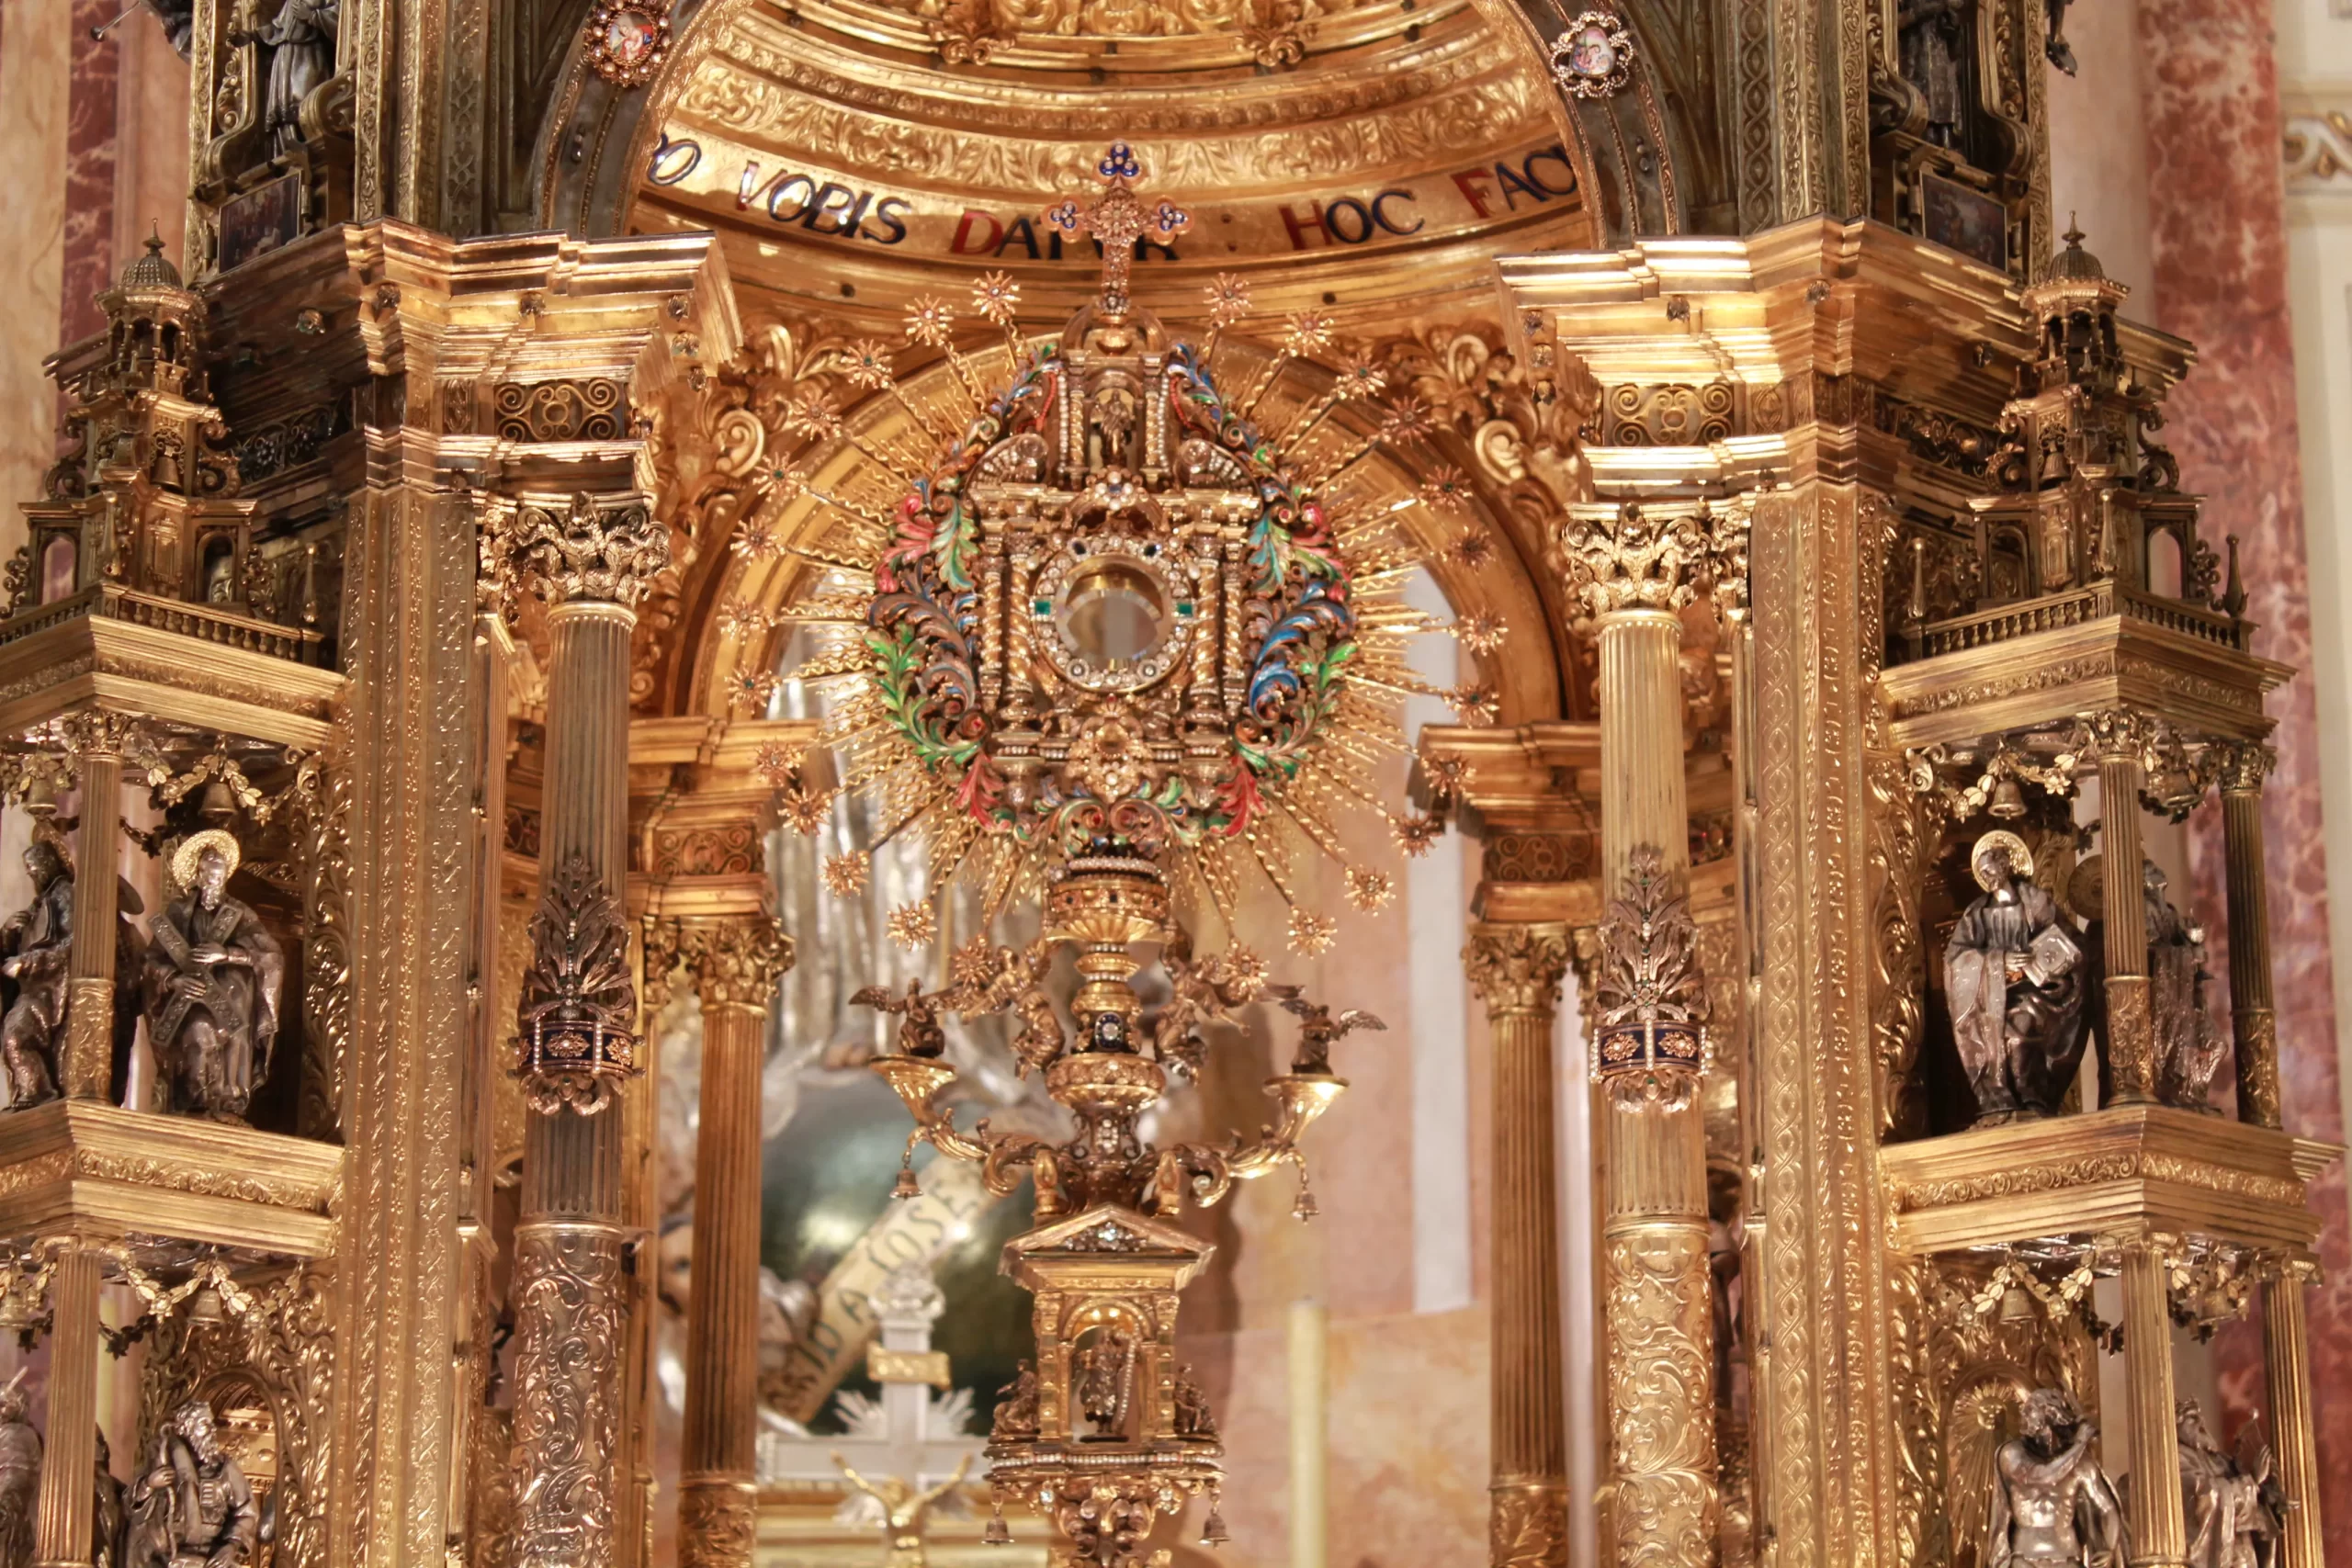 There are 159 sculptures adorning the monstrance used in the annual Corpus Christi procession in Valencia, Spain, including biblical scenes from the Old Testament up to the Good Shepherd and the risen Christ. The apostles and doctors of the Church adorn the host, and Eucharistic miracles are depicted. Saints particularly devoted to the Eucharist are part of the multitude of adorers, as is Pope Pius X, known as the "pope of the Eucharist" since he encouraged frequent reception of the sacrament and lowered the age for first Communion. June 2, 2024. Credit: Archivalencia/Catedral VLC